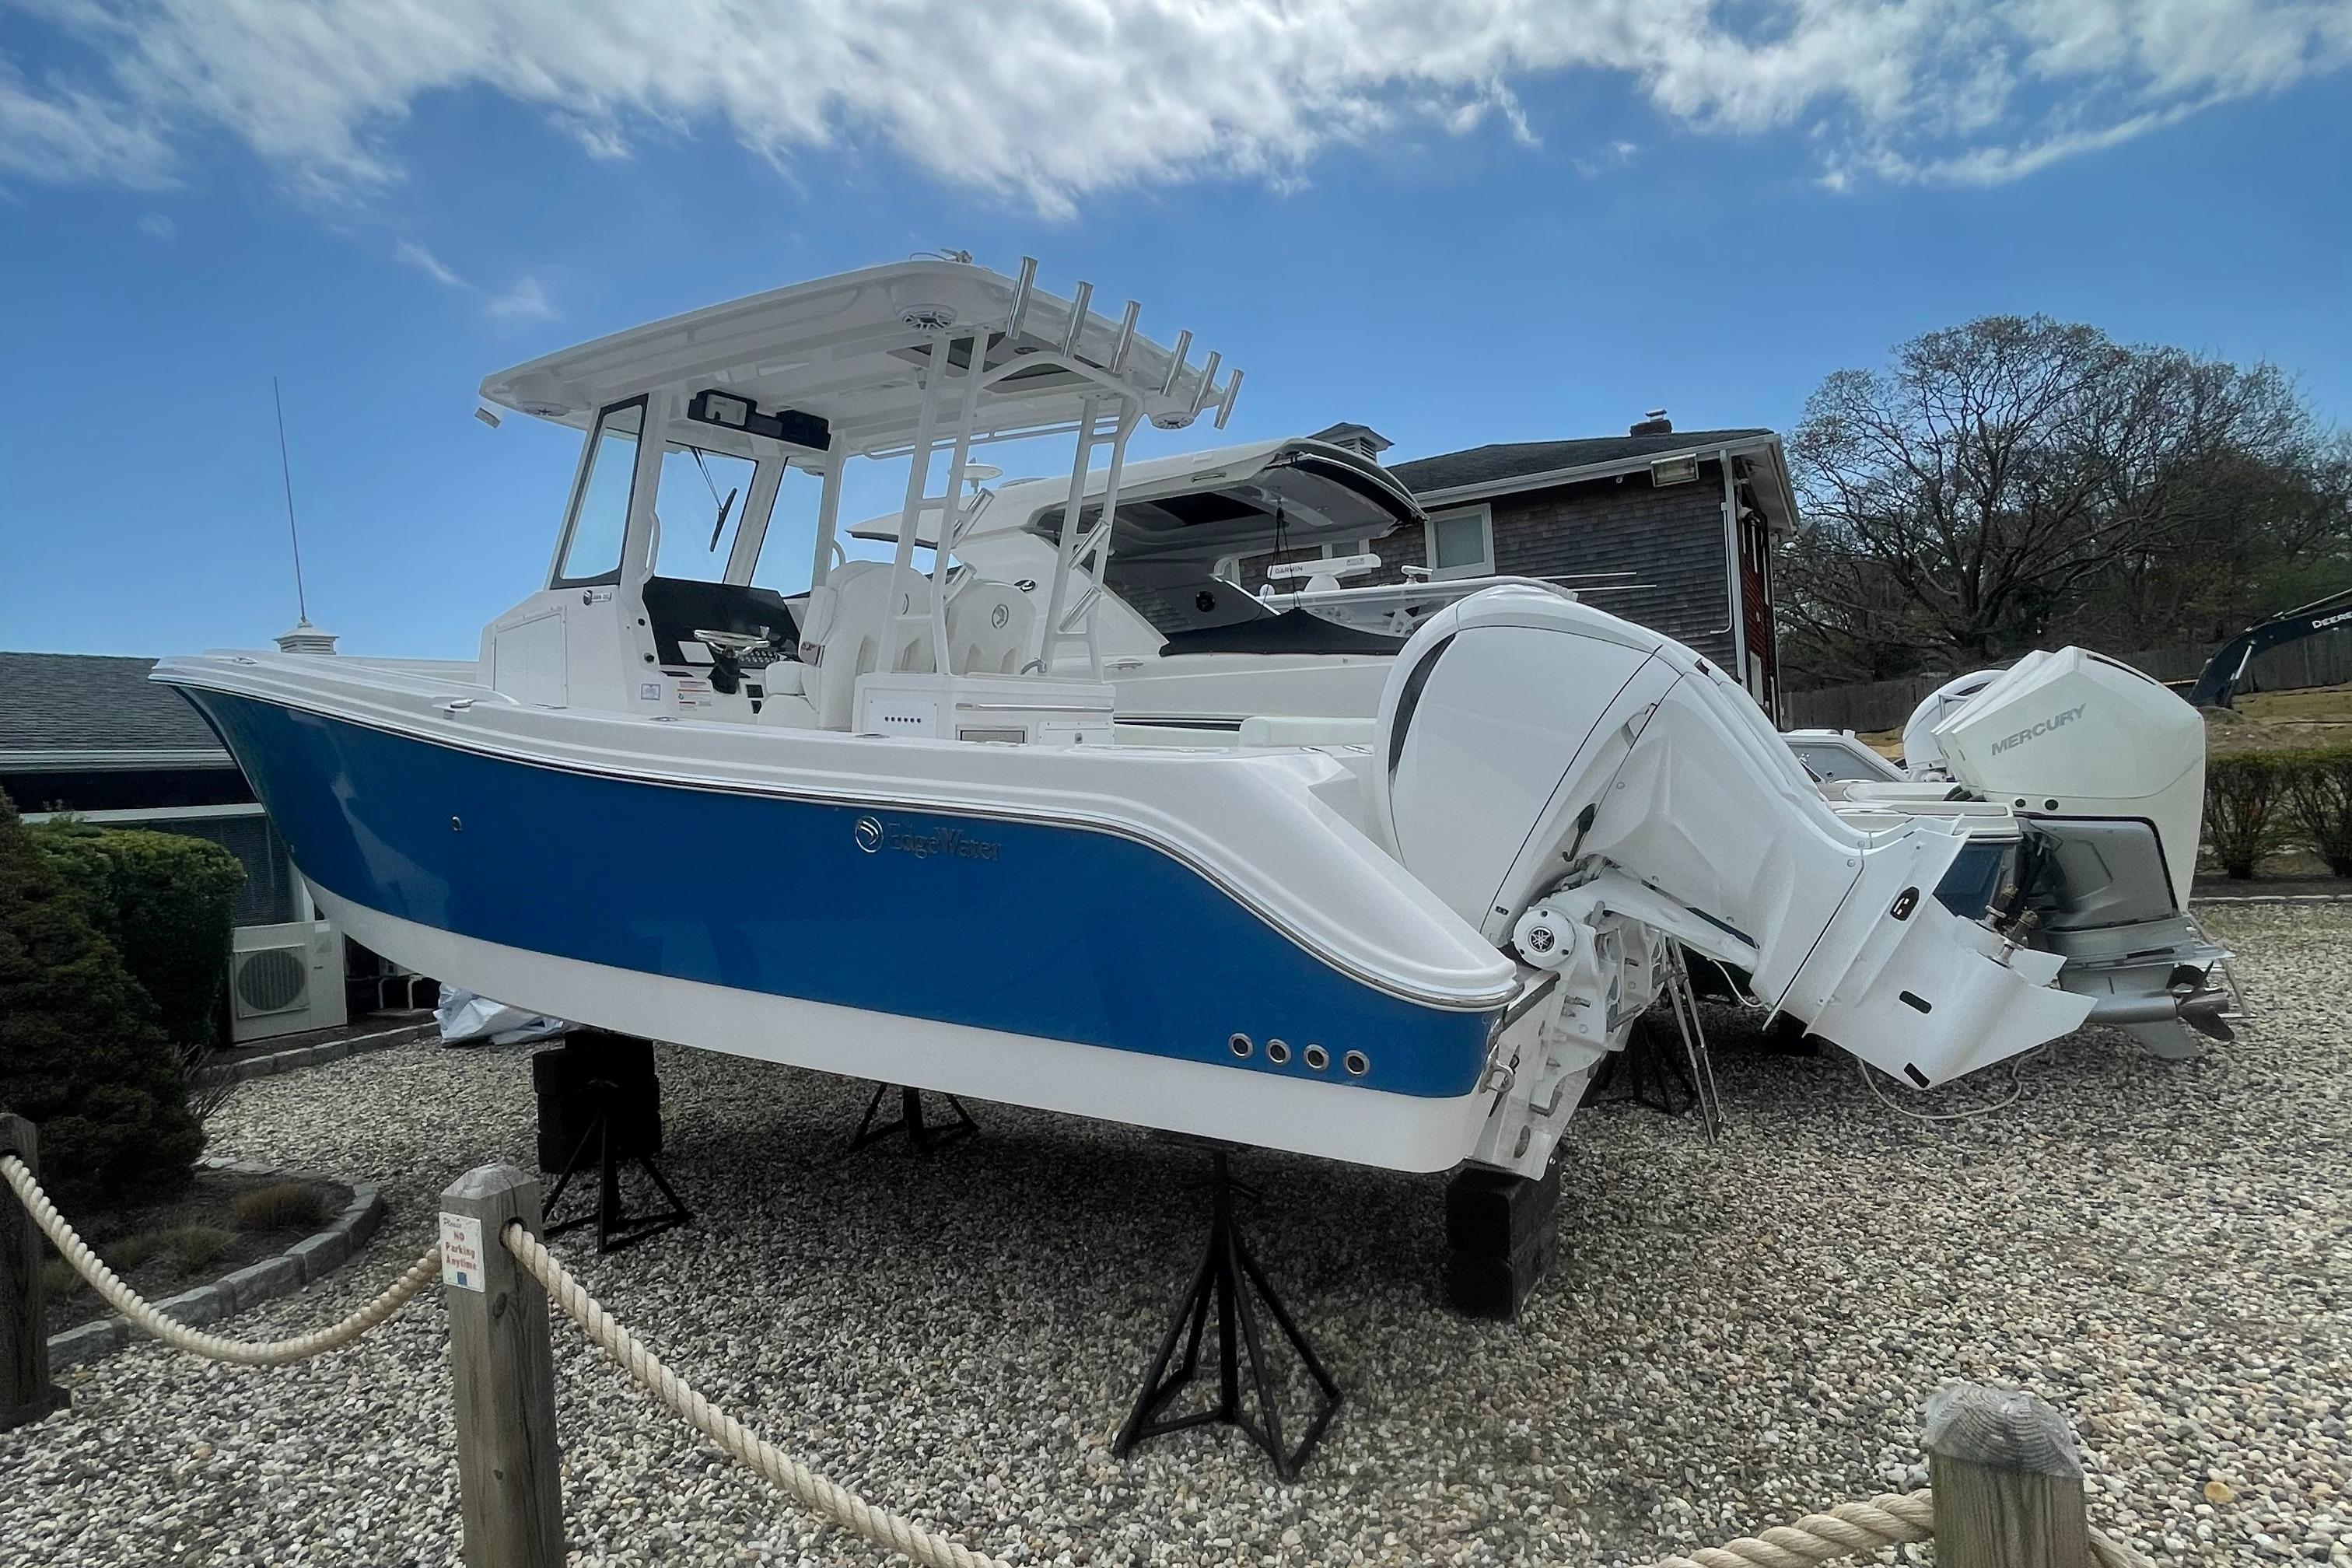 Boston Whaler 380 Outrage boats for sale in New York - Boat Trader